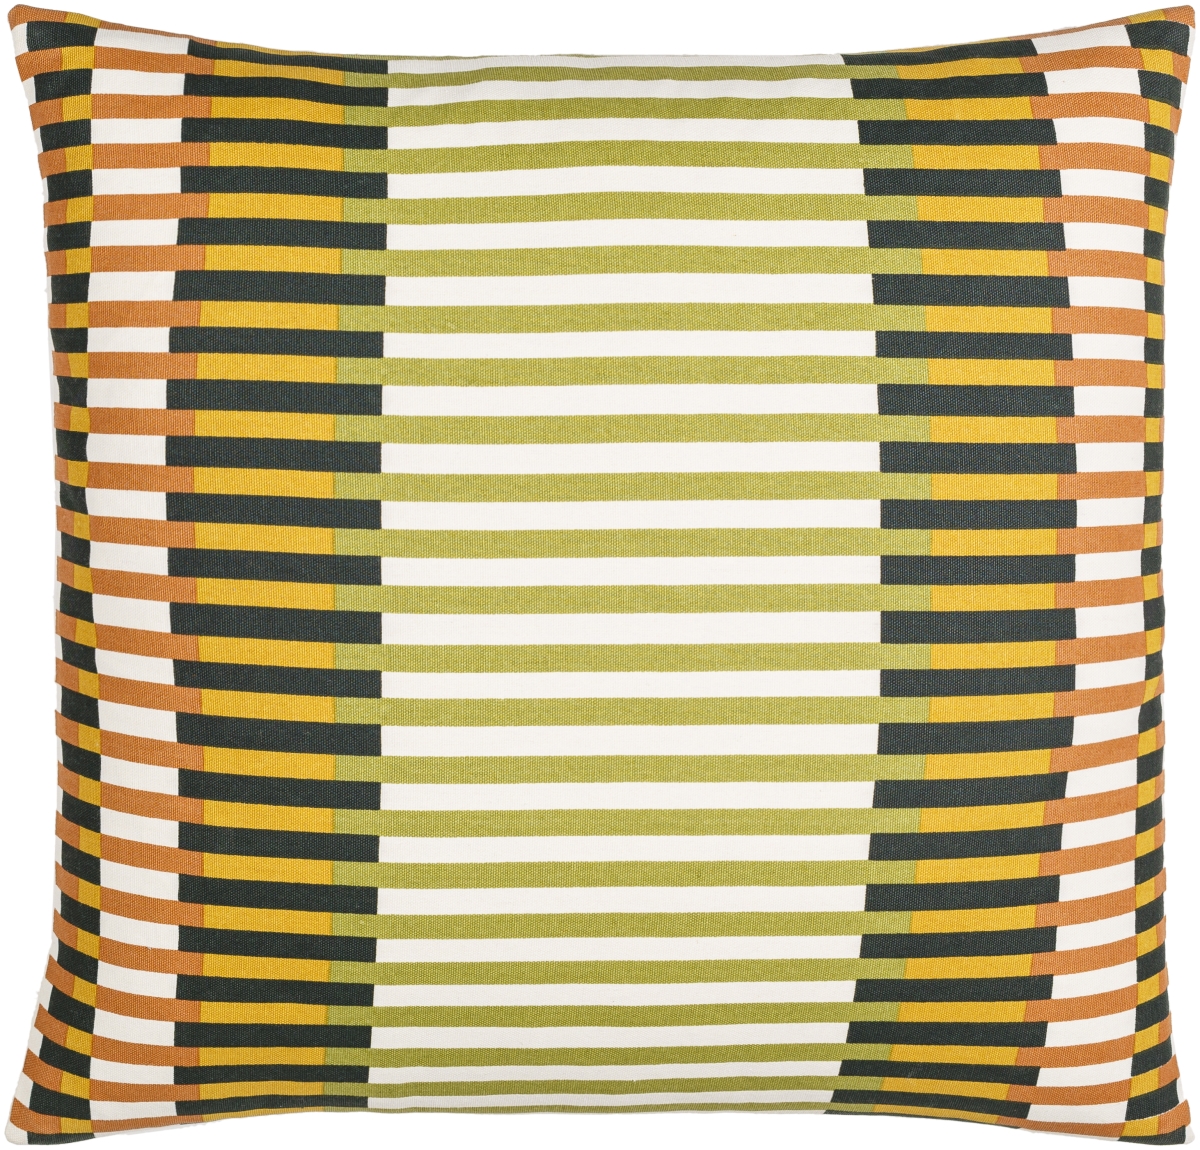 Picture of Jason Wu JSW003-2020 20 x 20 in. Square Pillow Cover